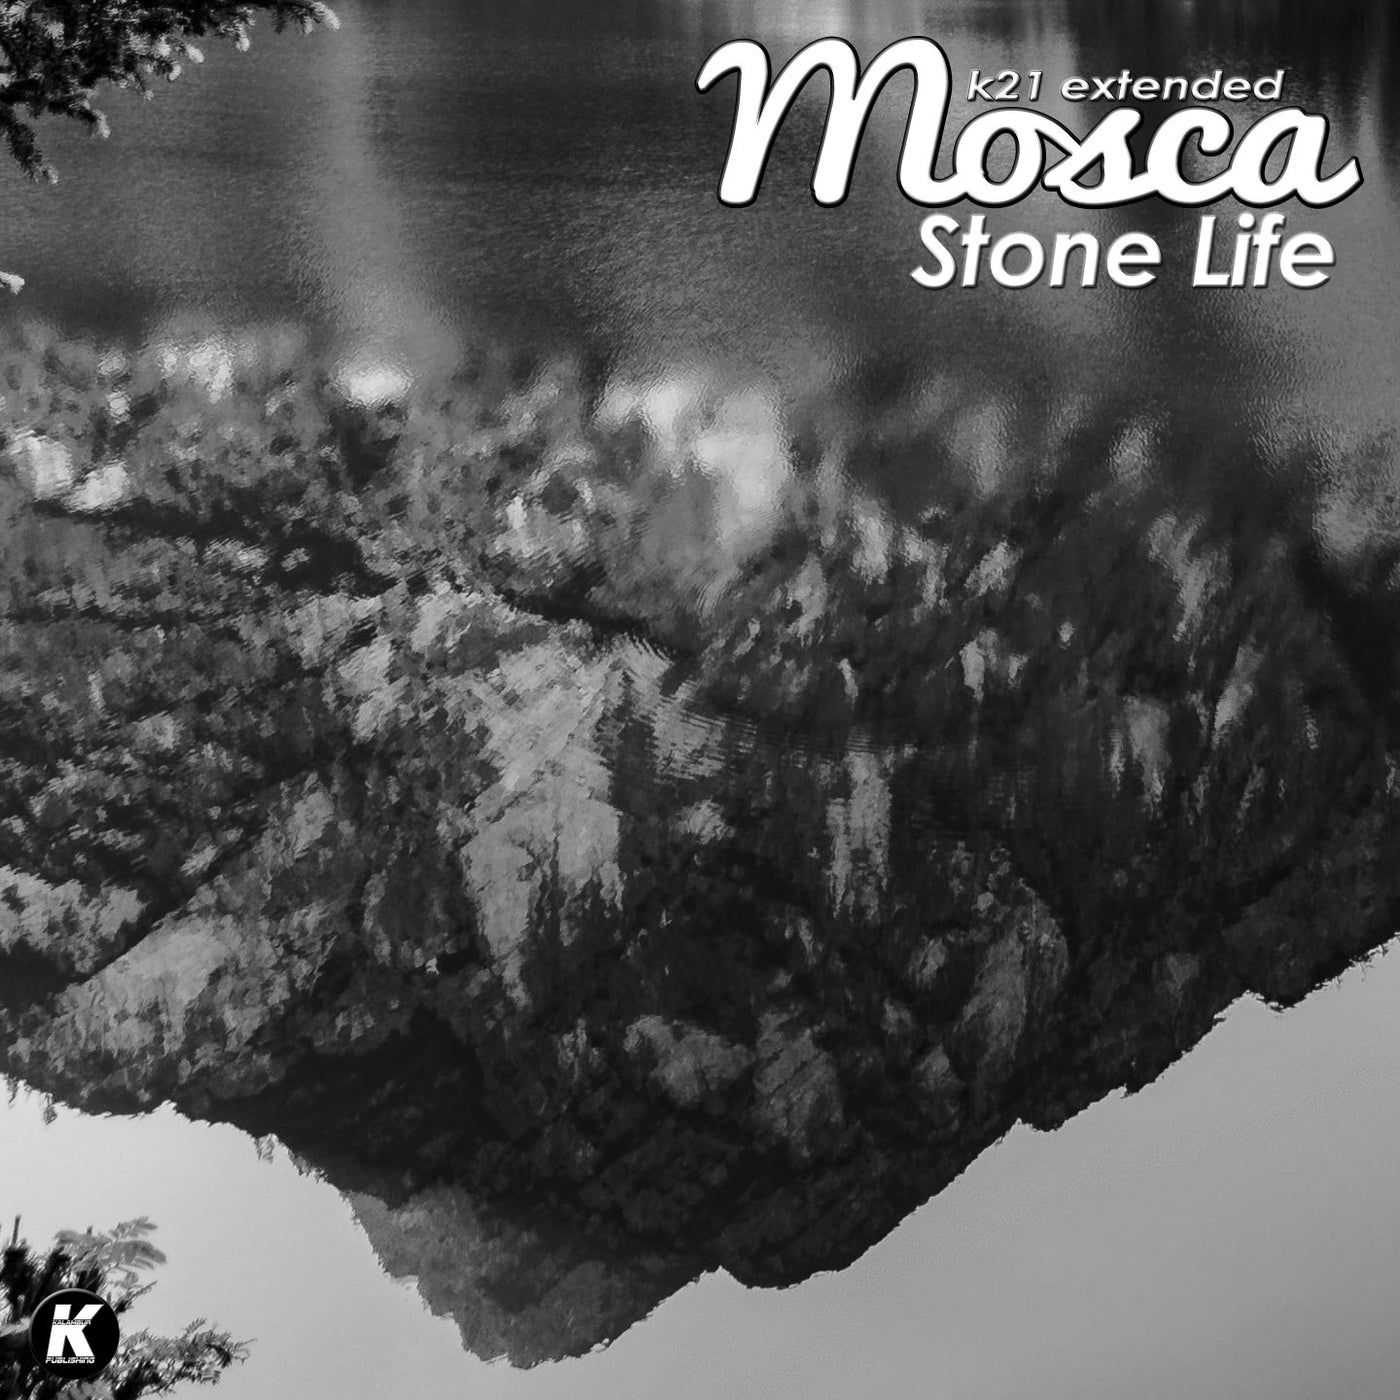 Stone life (K21extended version)